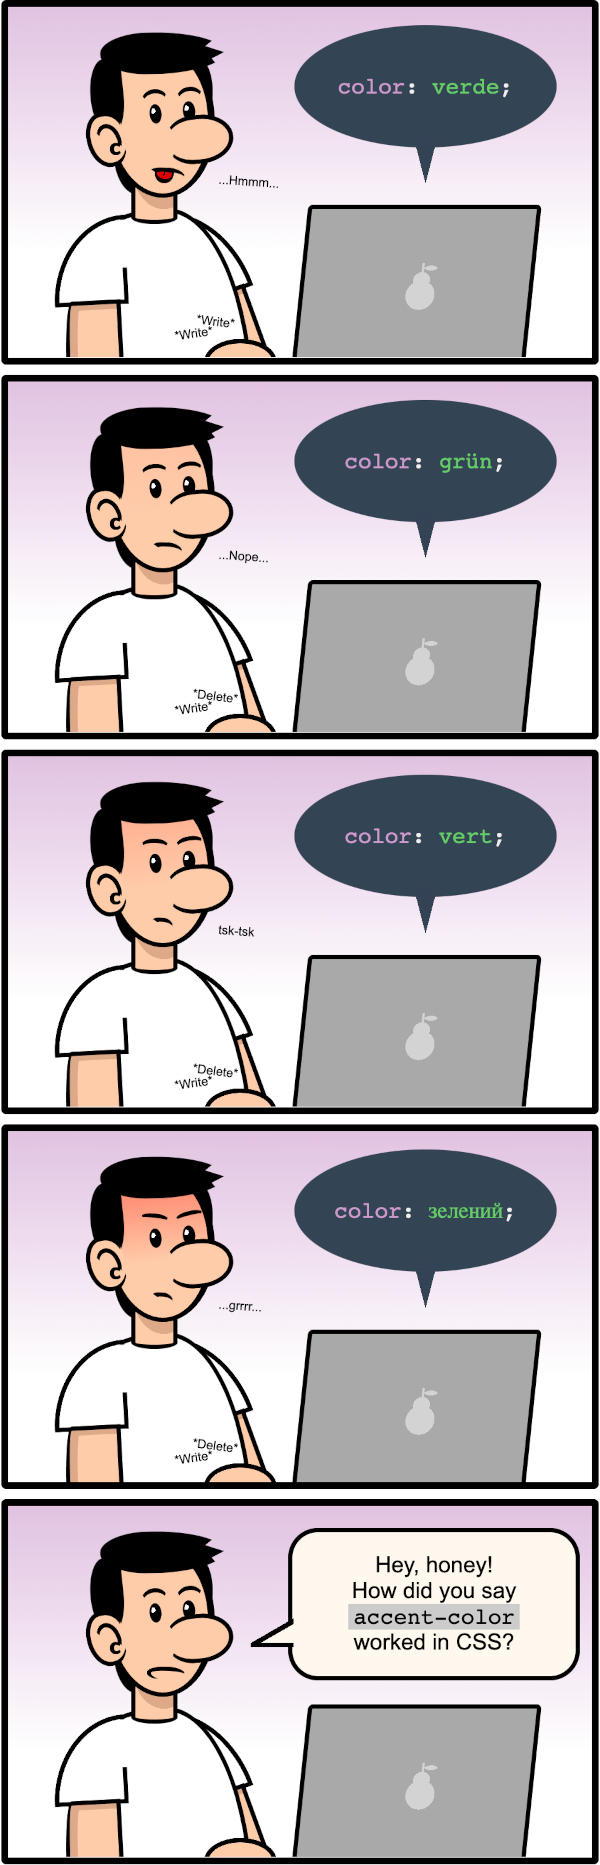 Comic strip with 5 panels showing a white man getting angrier and angrier while updating the color value on CSS to green written in Spanish, German, French, and Ukranian. In the final panel he asks 'Hey, honey! How did you say accent-color worked in CSS?'